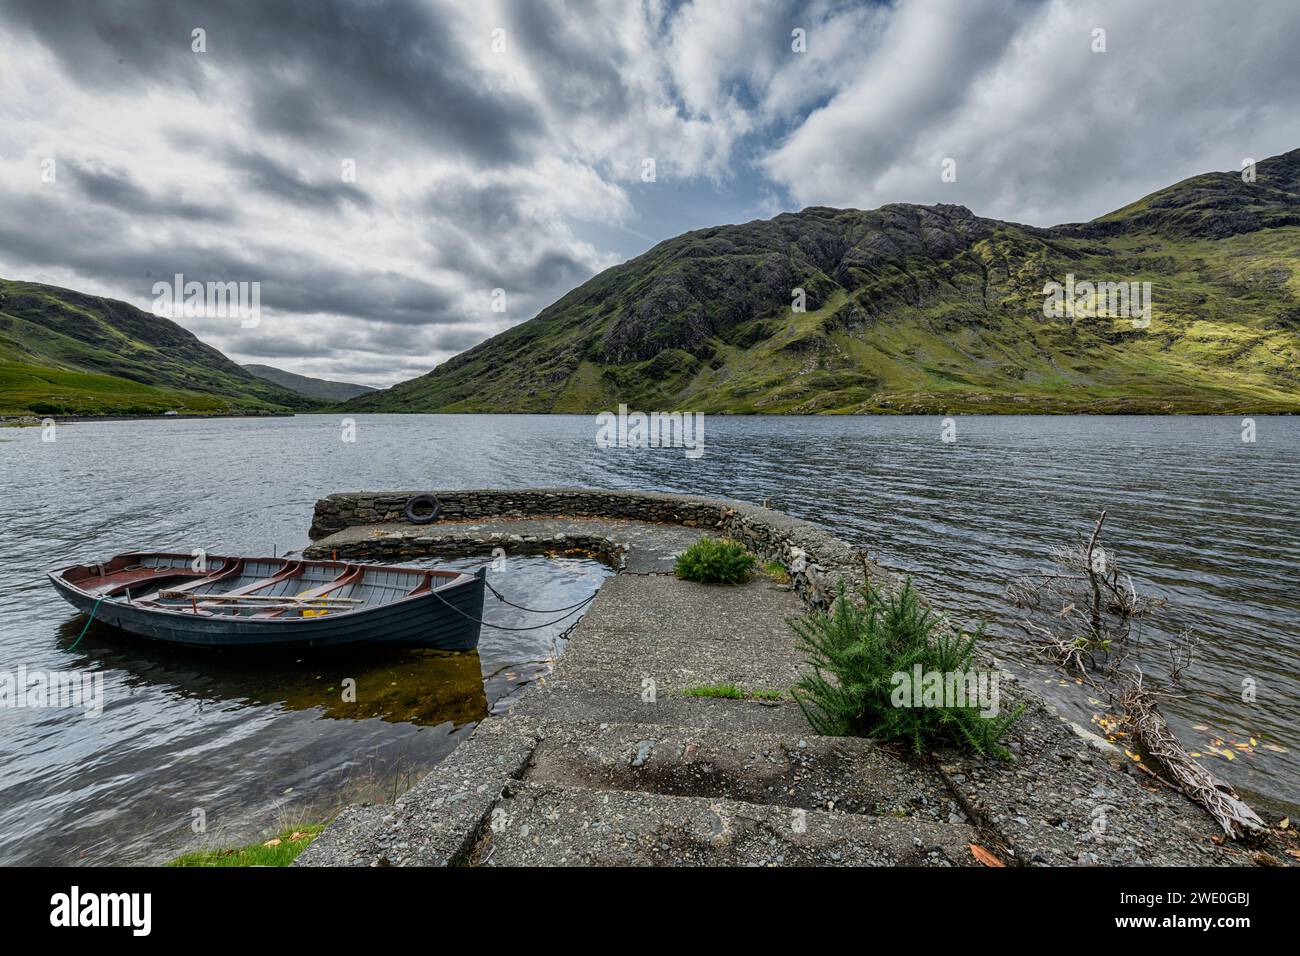 Landscape of a stone jetty with some wooden boats on a river in the East of Ireland with cloudy sky Stock Photo